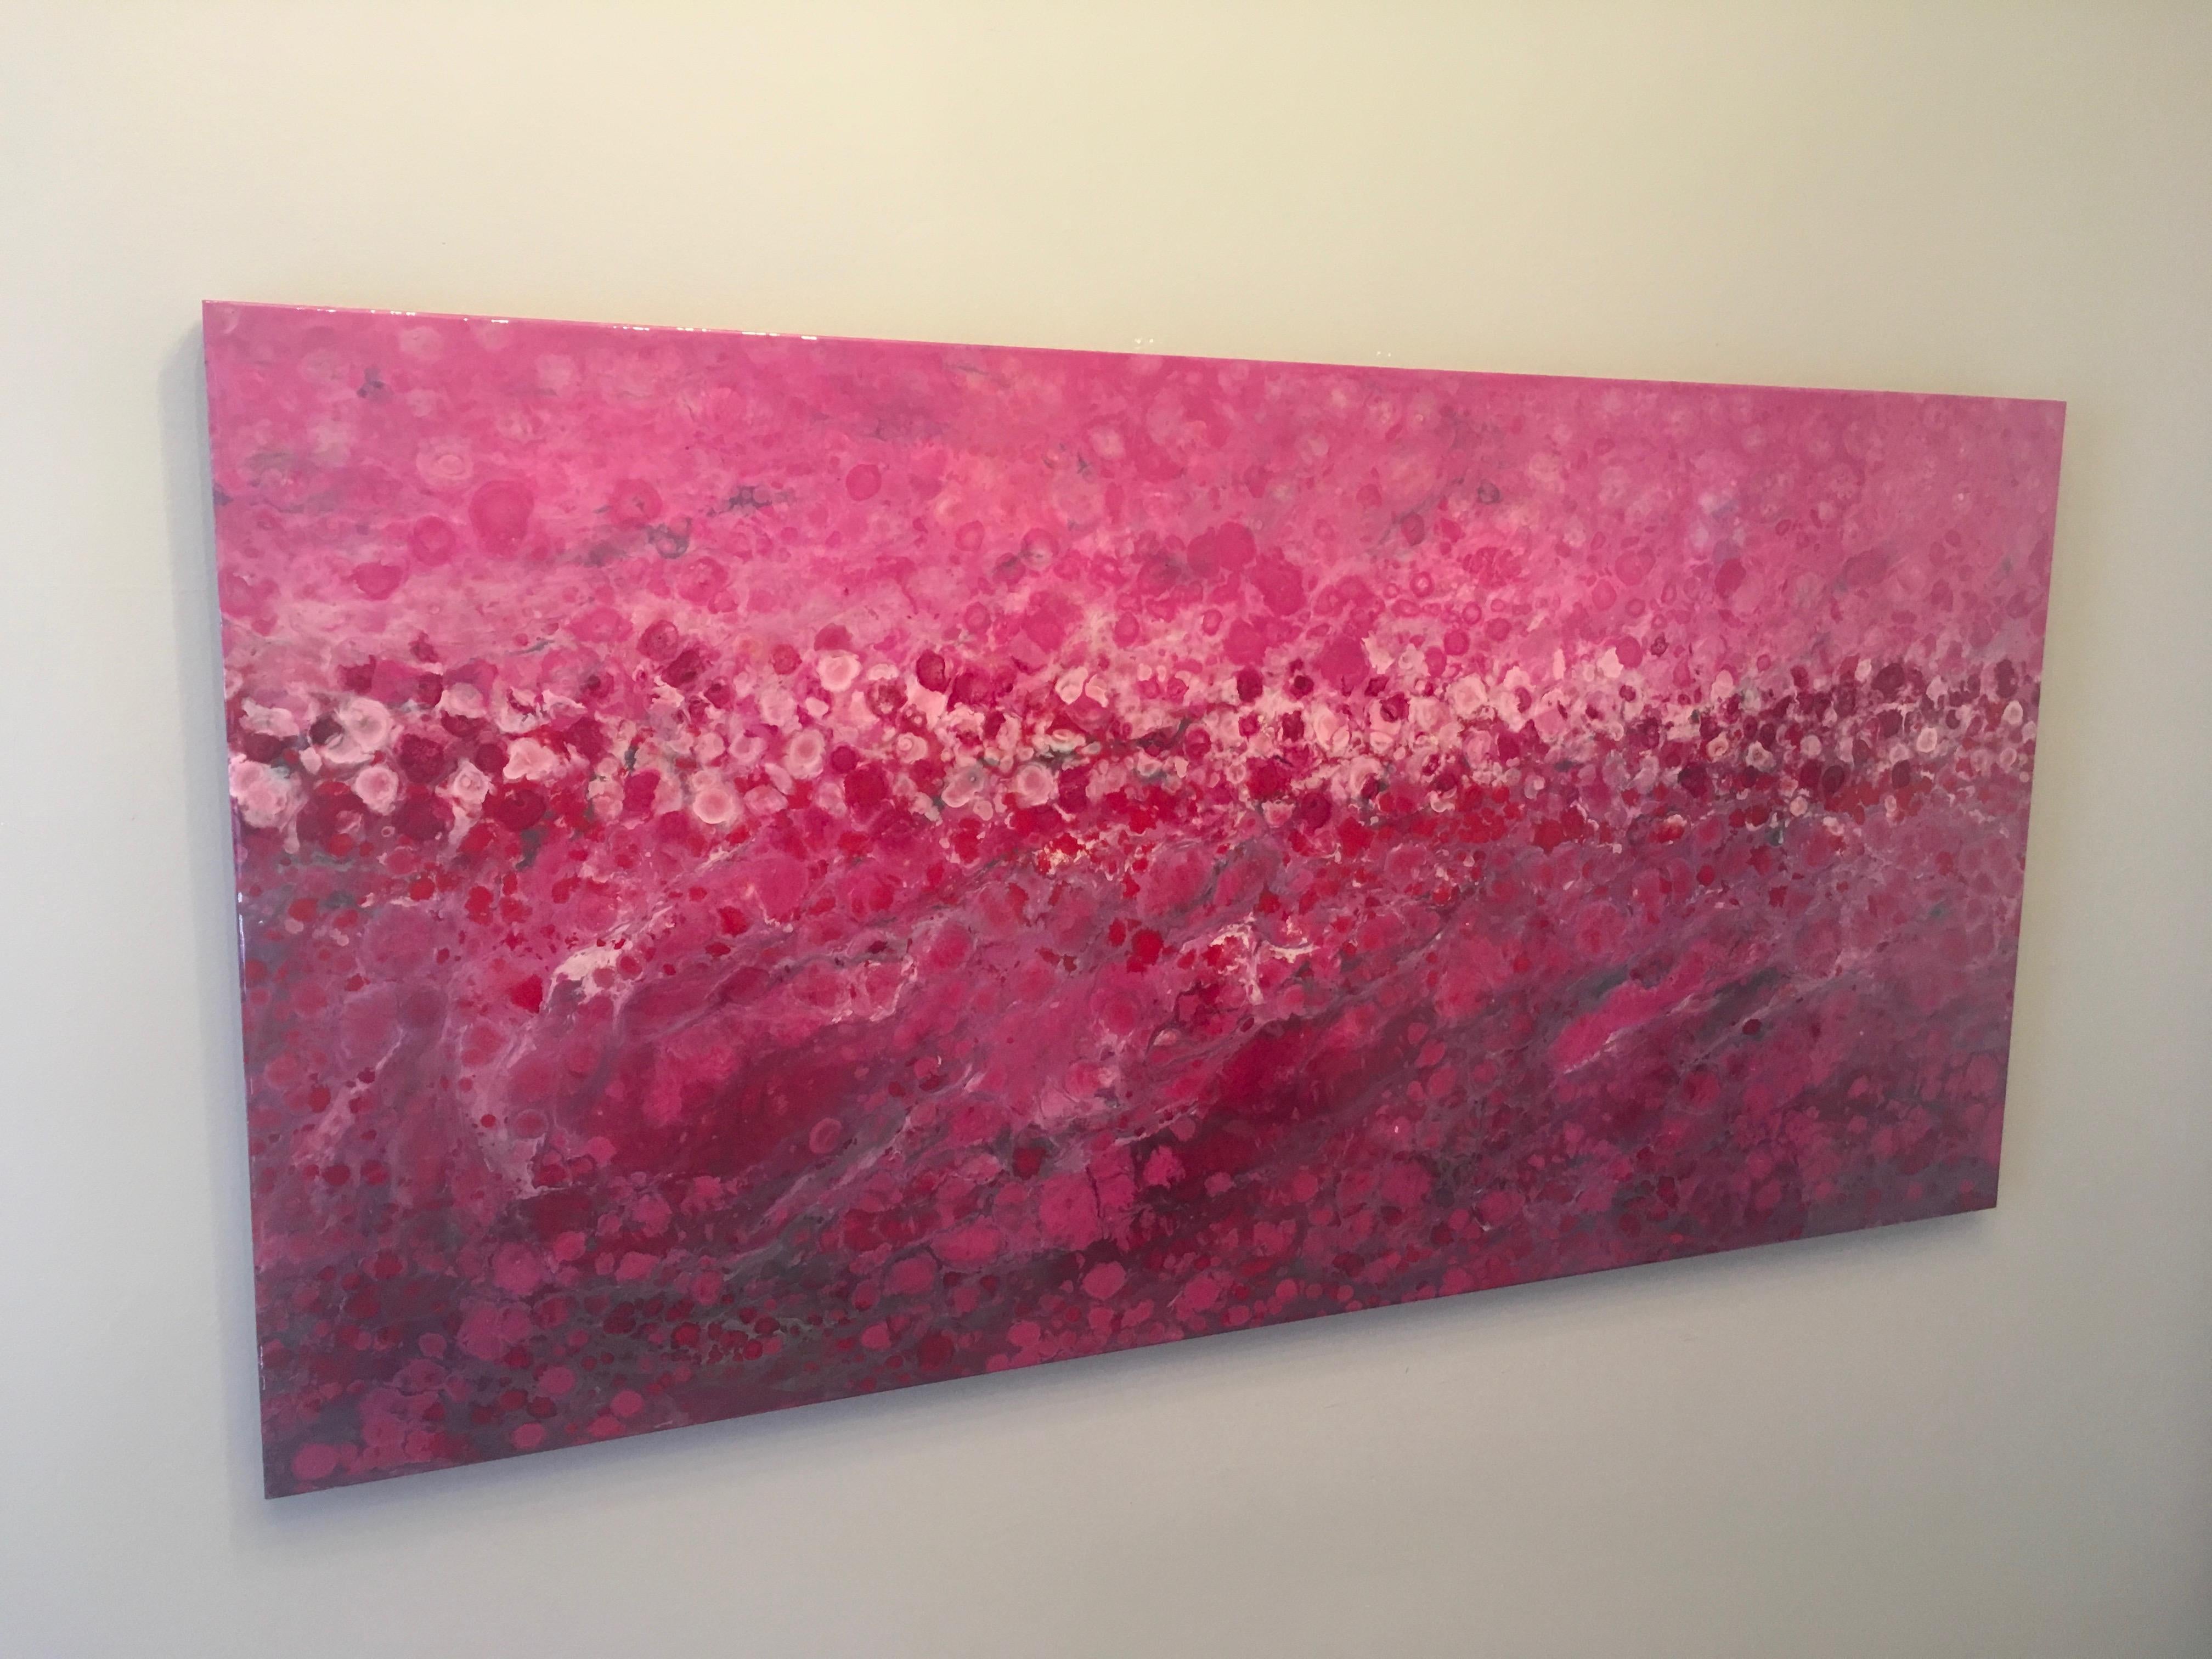 Riviere Aux Cerises, large 30x60 abstracted landscape, Hi-gloss, Viva Magenta - Contemporary Painting by Marie Danielle Leblanc